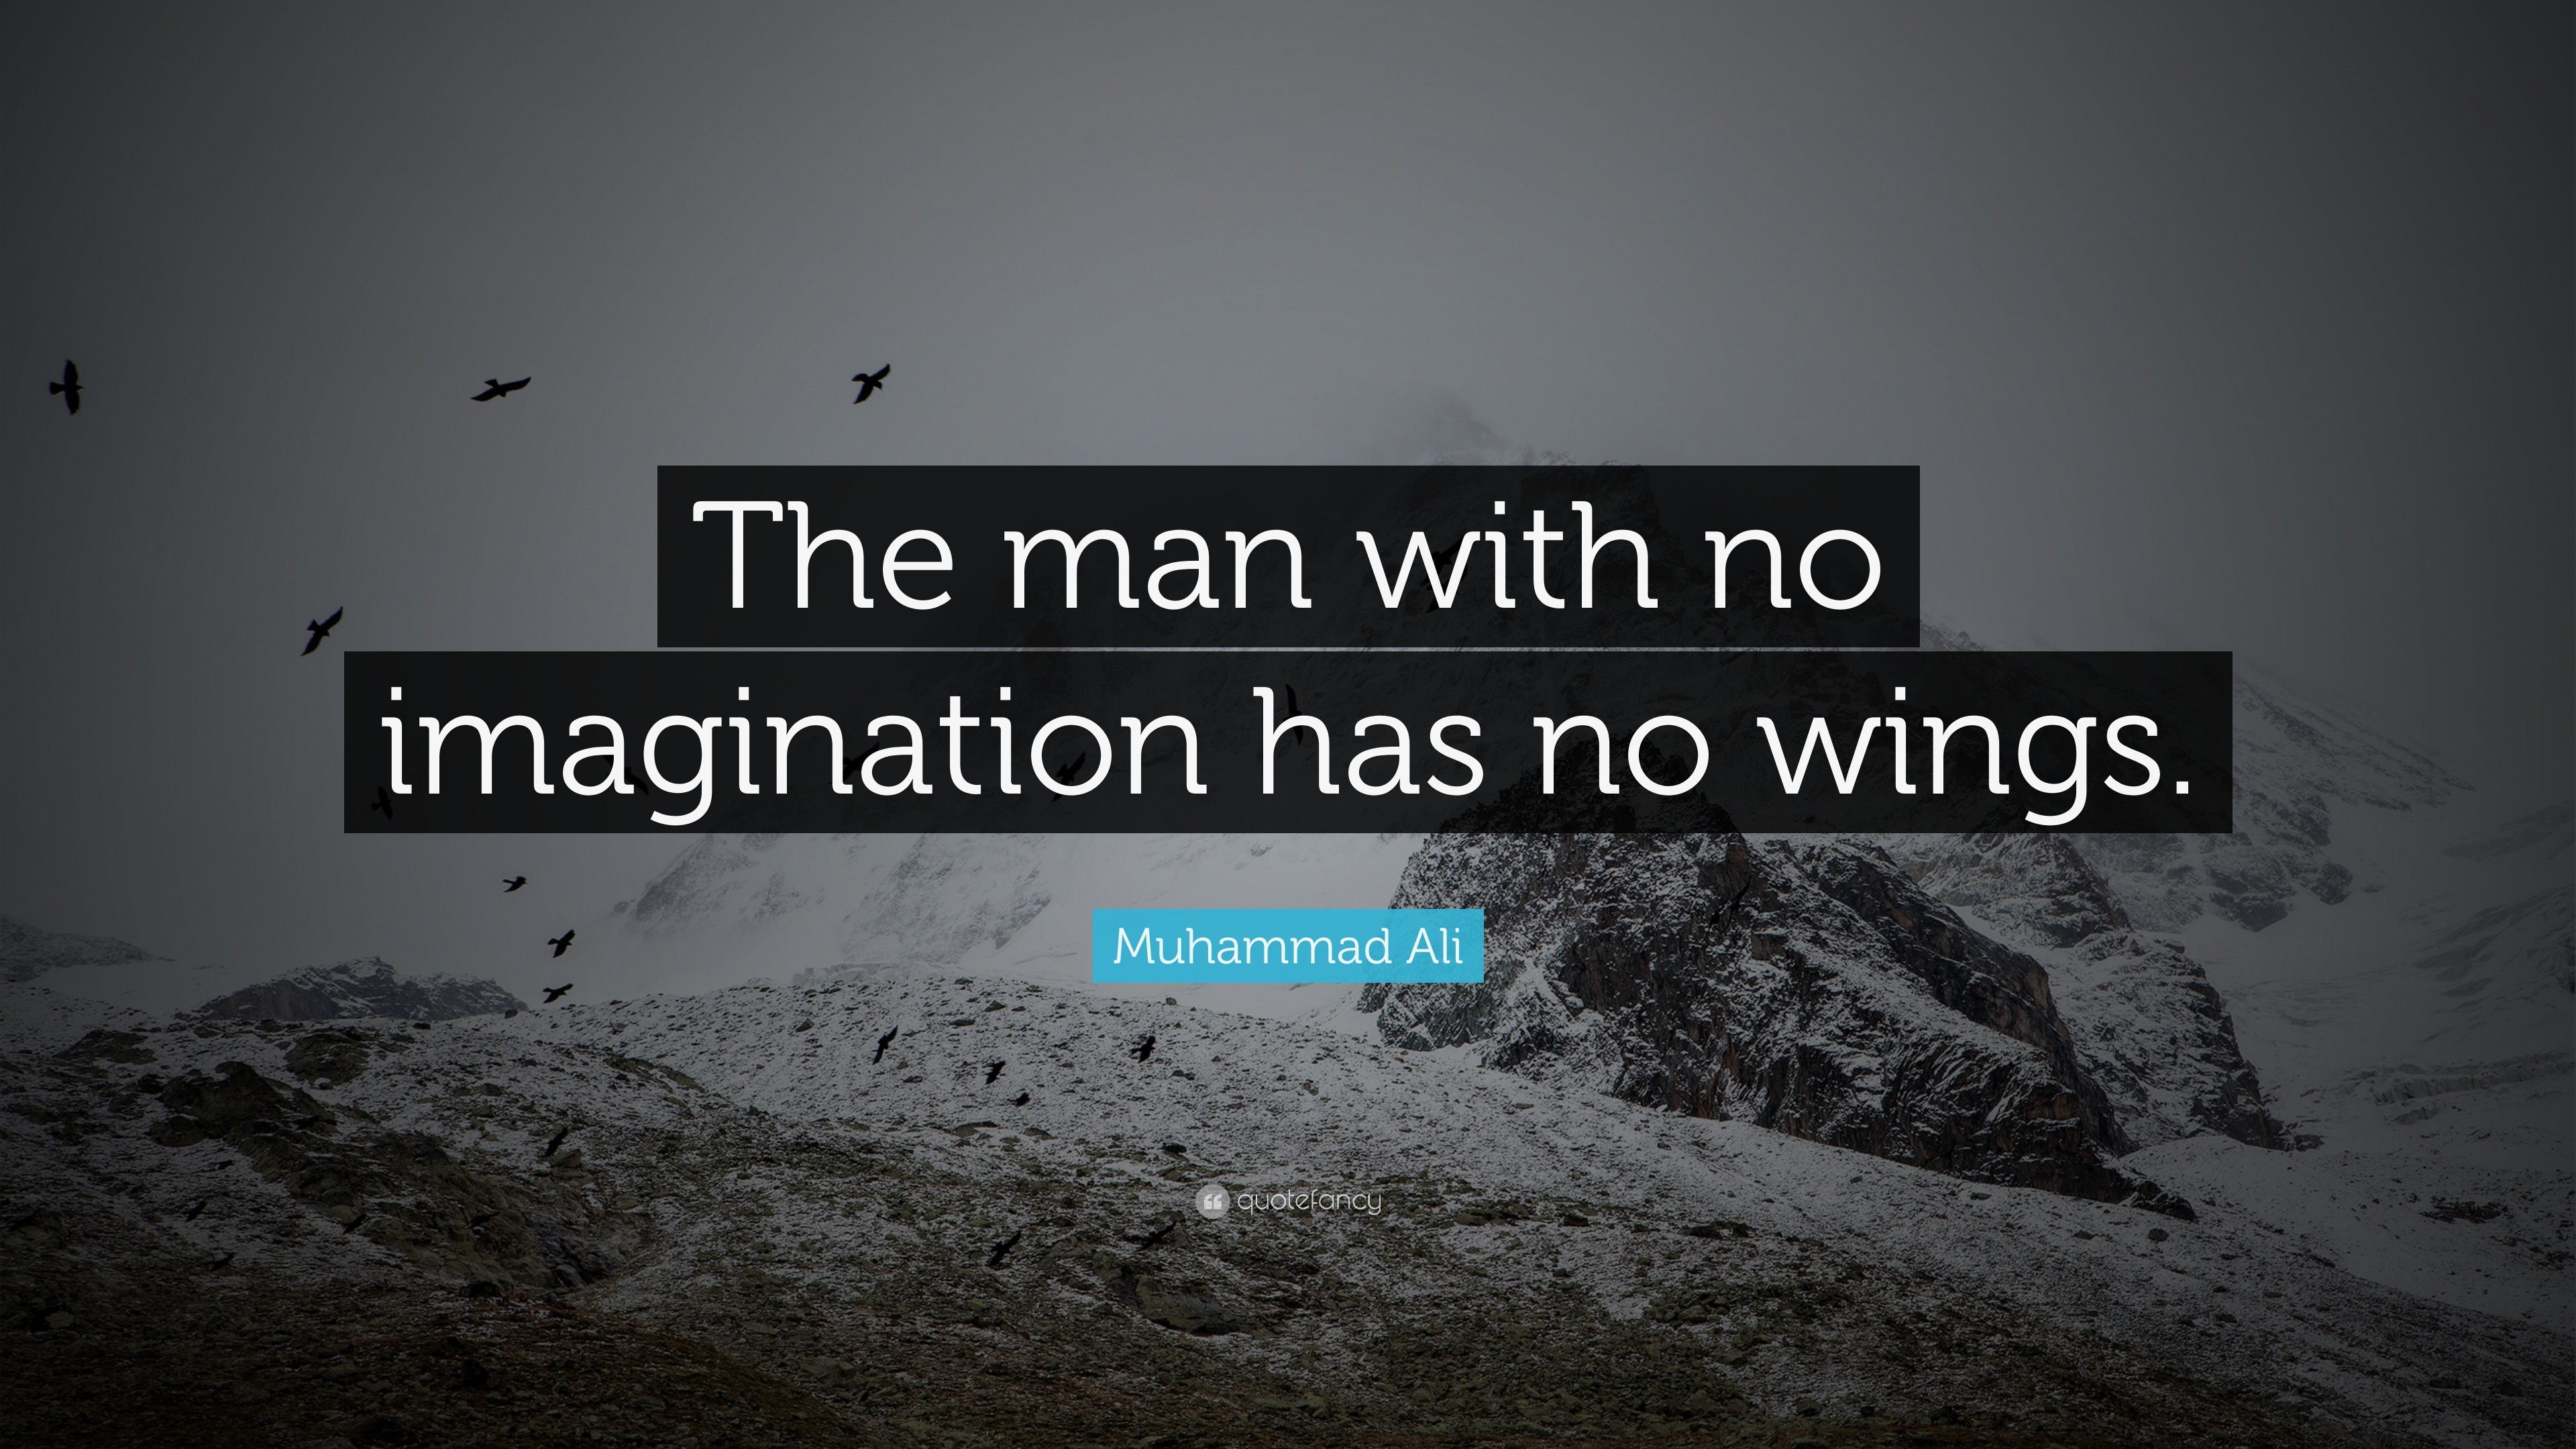 3840x2160 Muhammad Ali Quote: “The man with no imagination has no wings.”